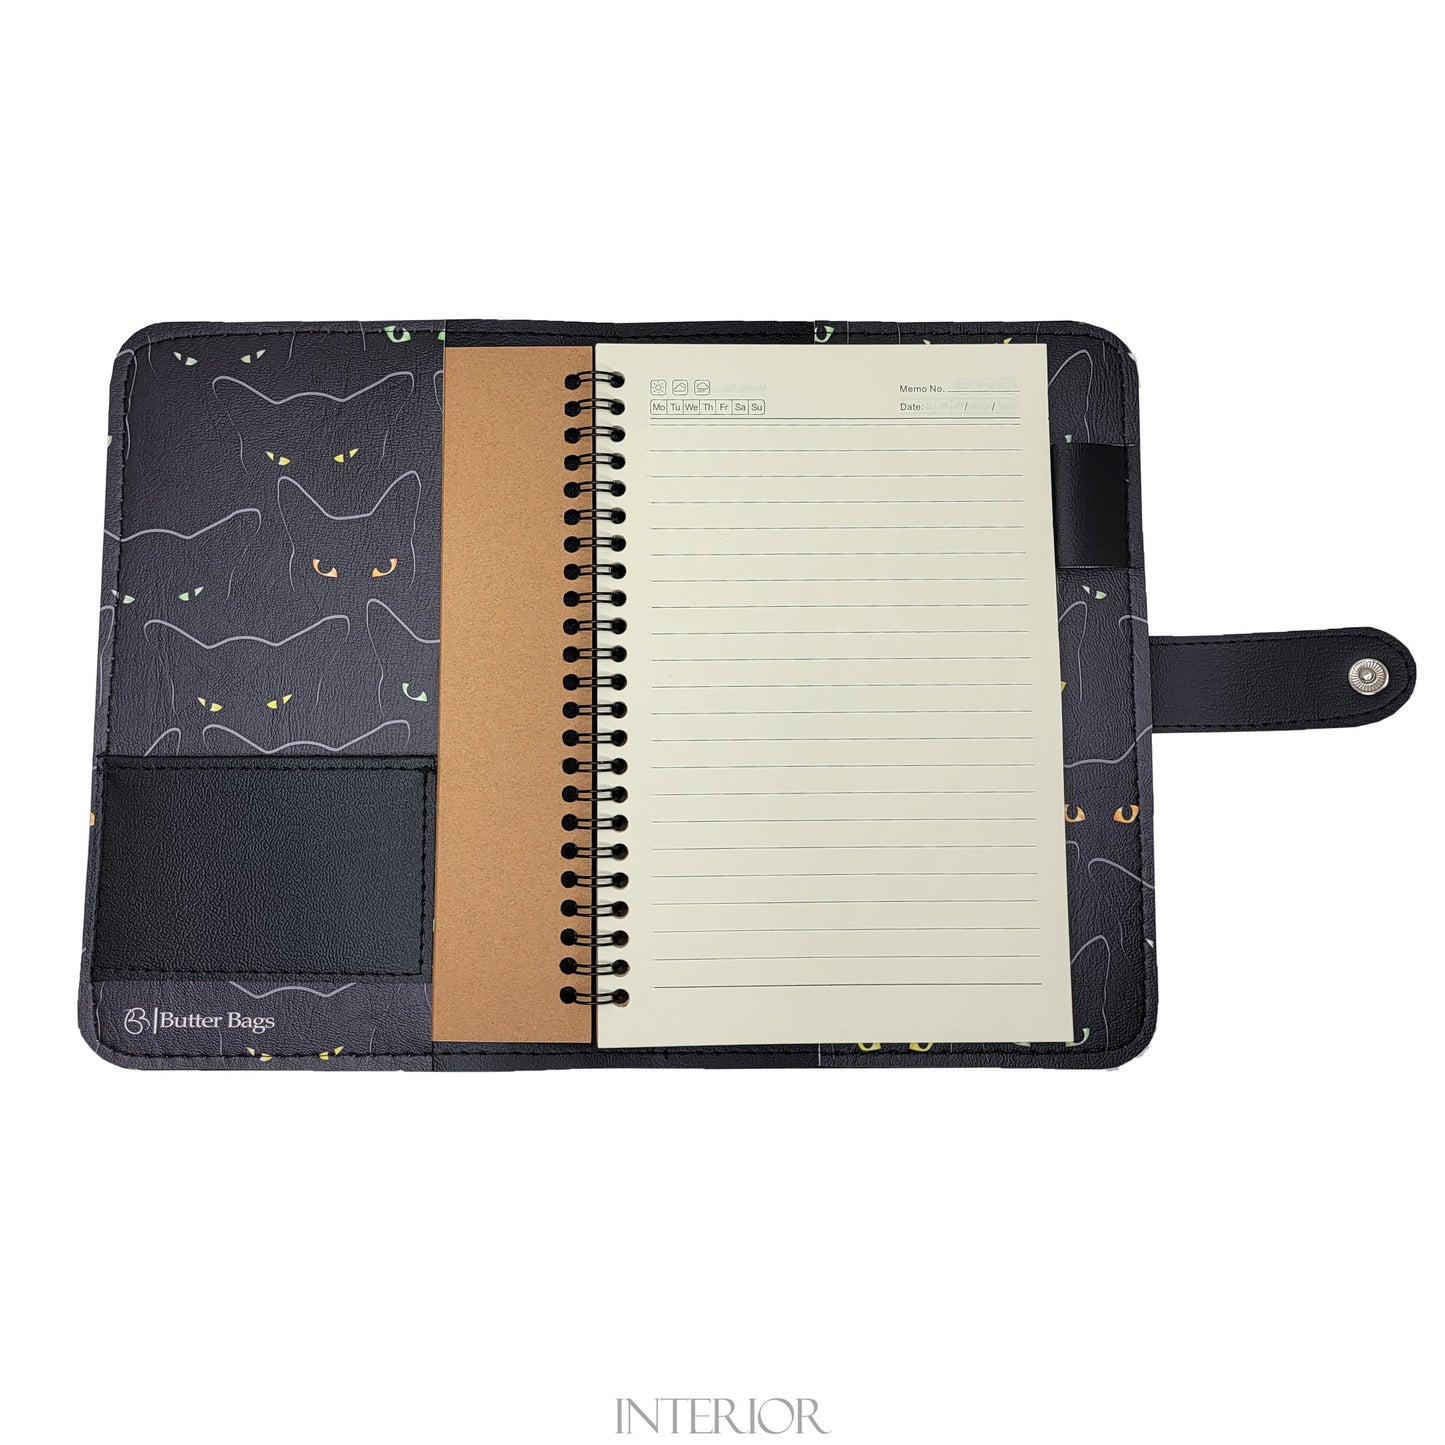 Black Cats- Notebook & Cover